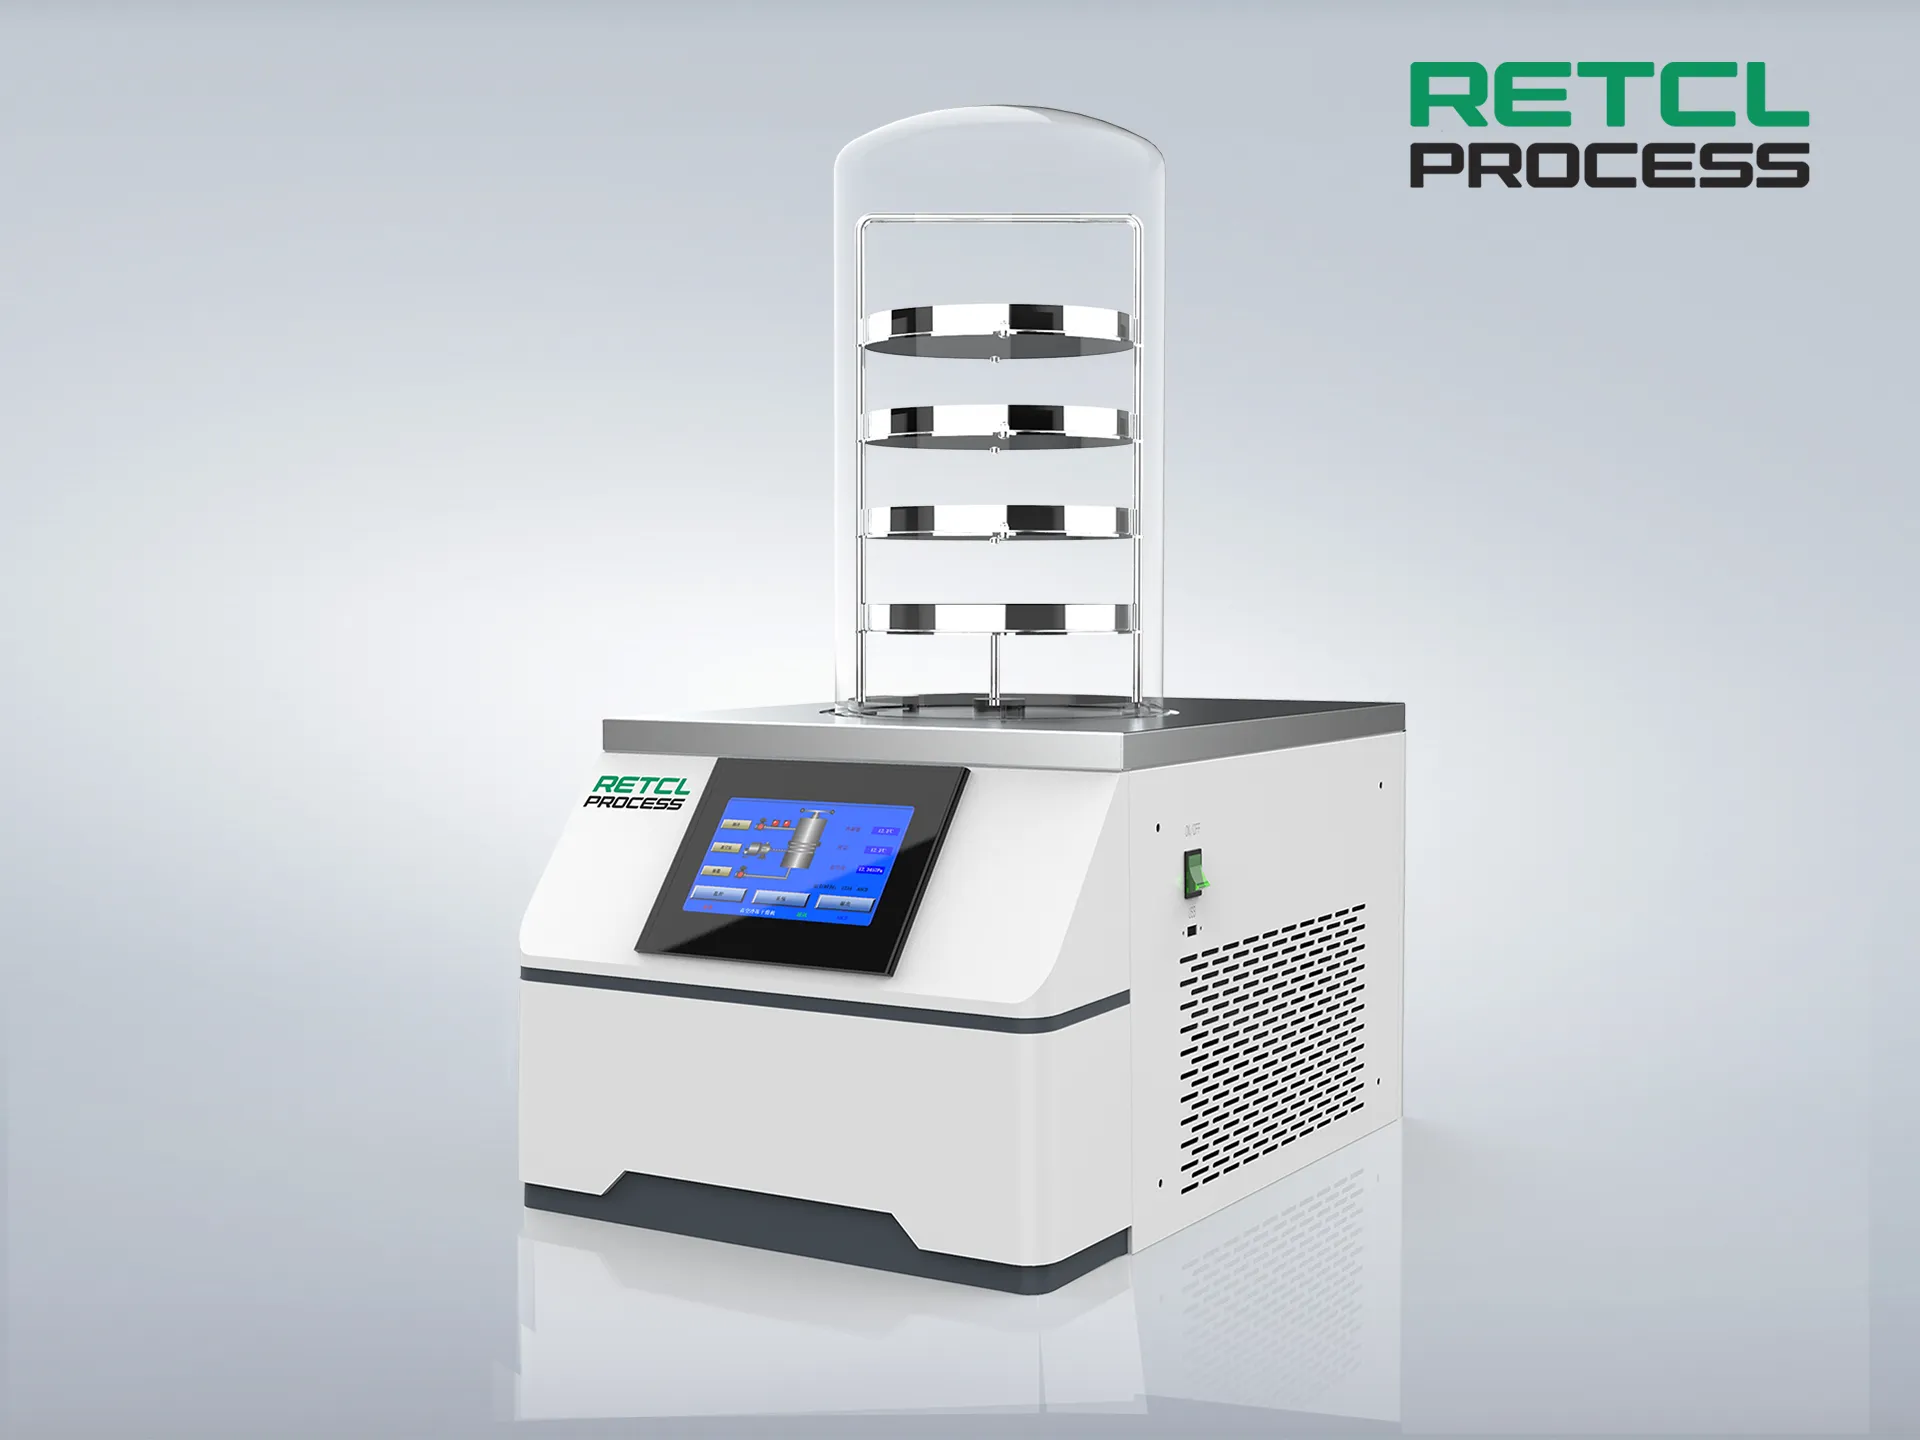 Benchtop Freeze Dryer RETCL Process - compact, programmable unit with touchscreen control panel for efficient lyophilization in the laboratory.